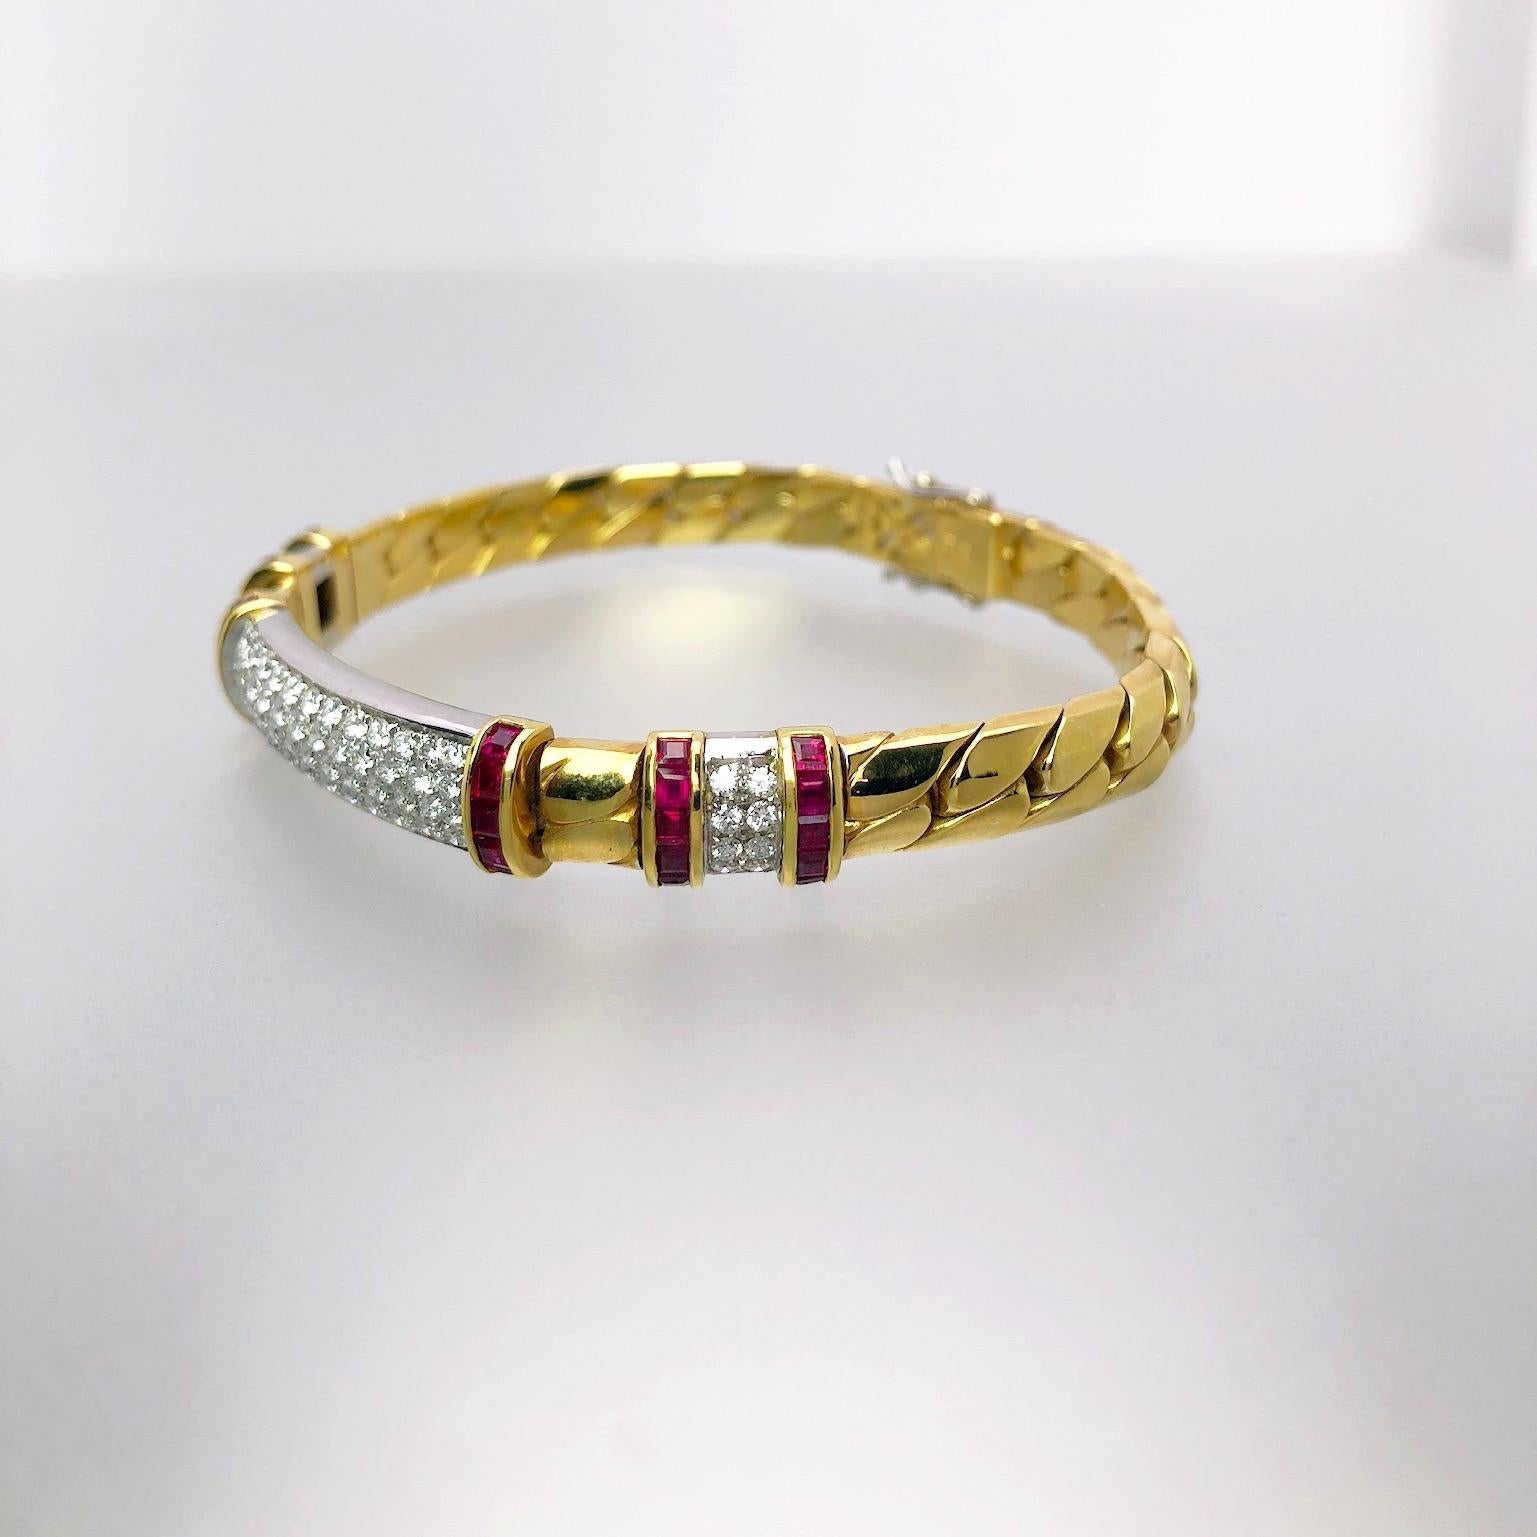 Designed by master craftsman Giuseppe Picchiotti, This Gourmette Ruby and Diamond Bracelet is a perfect example of a timeless piece that can be dressed up or down. 18Kt. Yellow and White gold link bracelet with pave diamond and square ruby motifs.